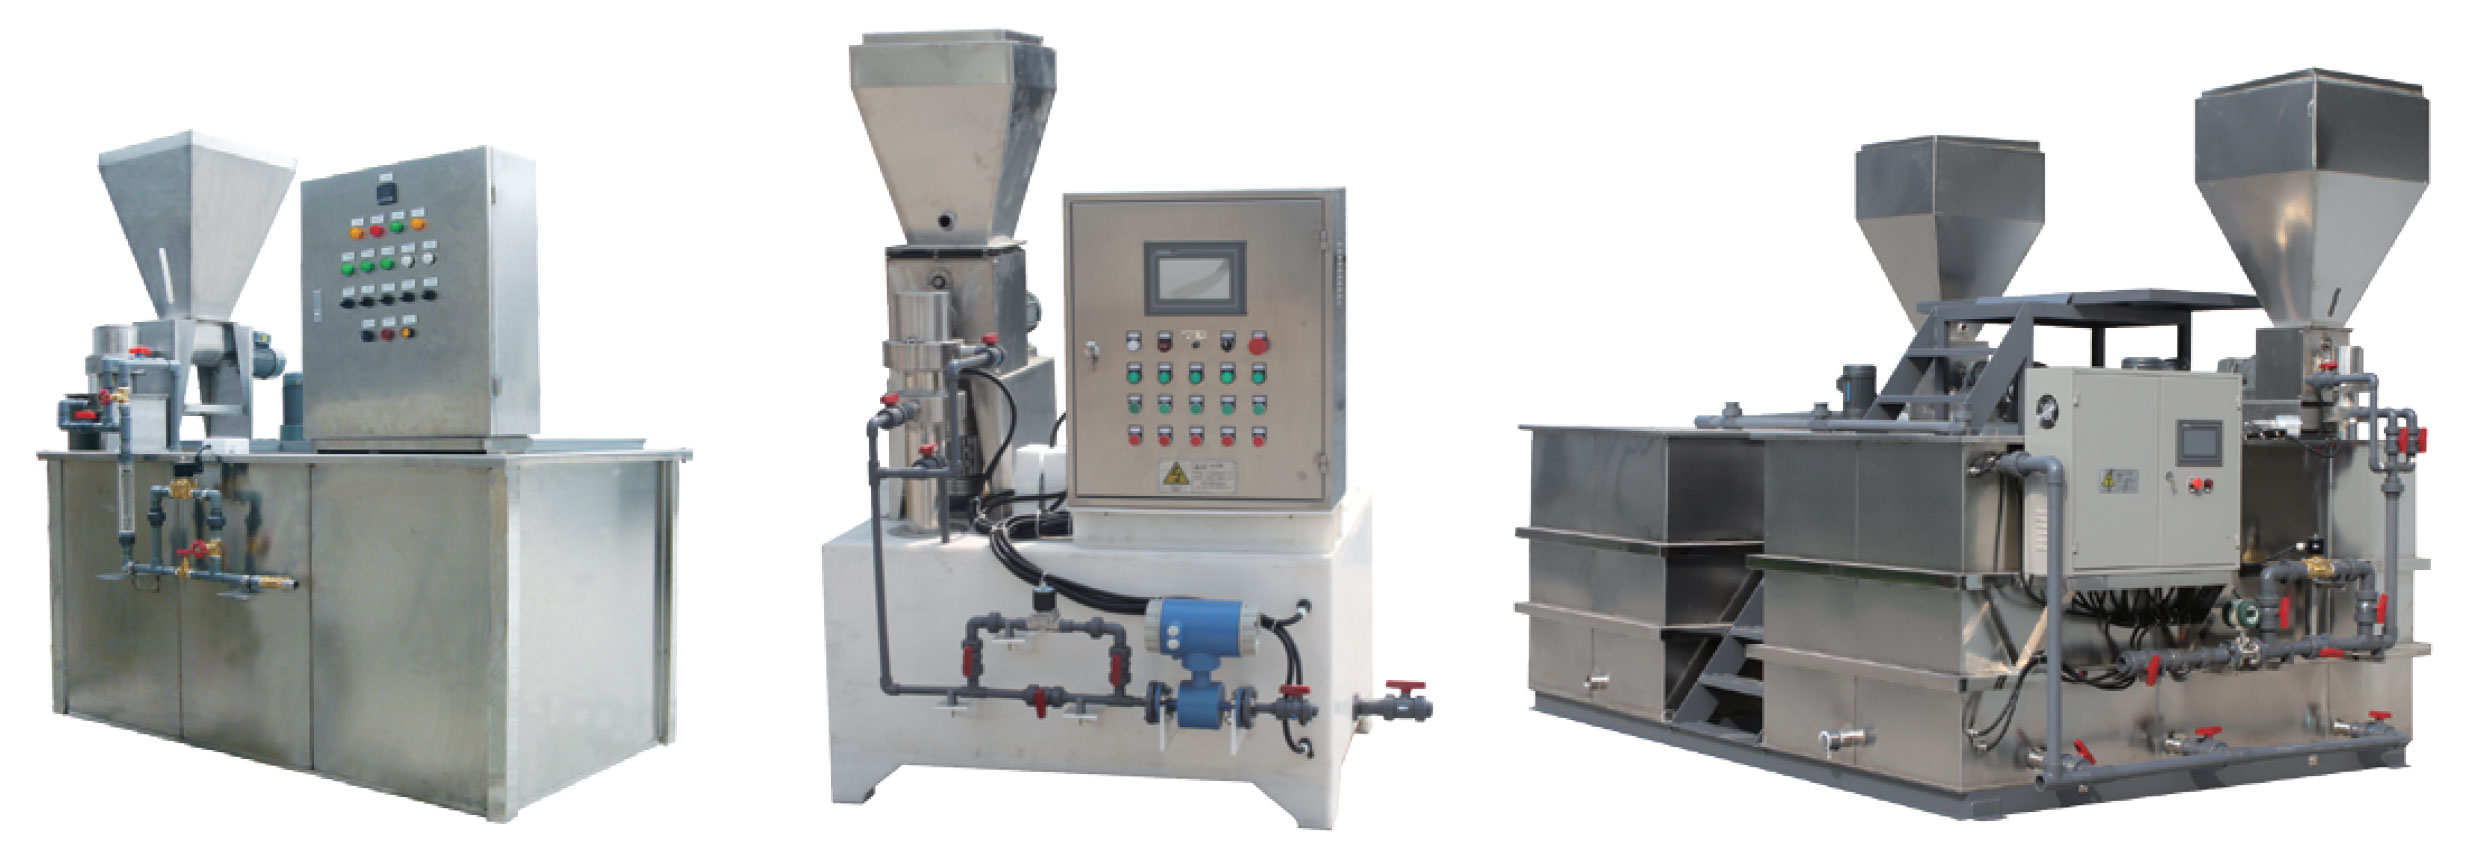 polymer preparation system in singapore